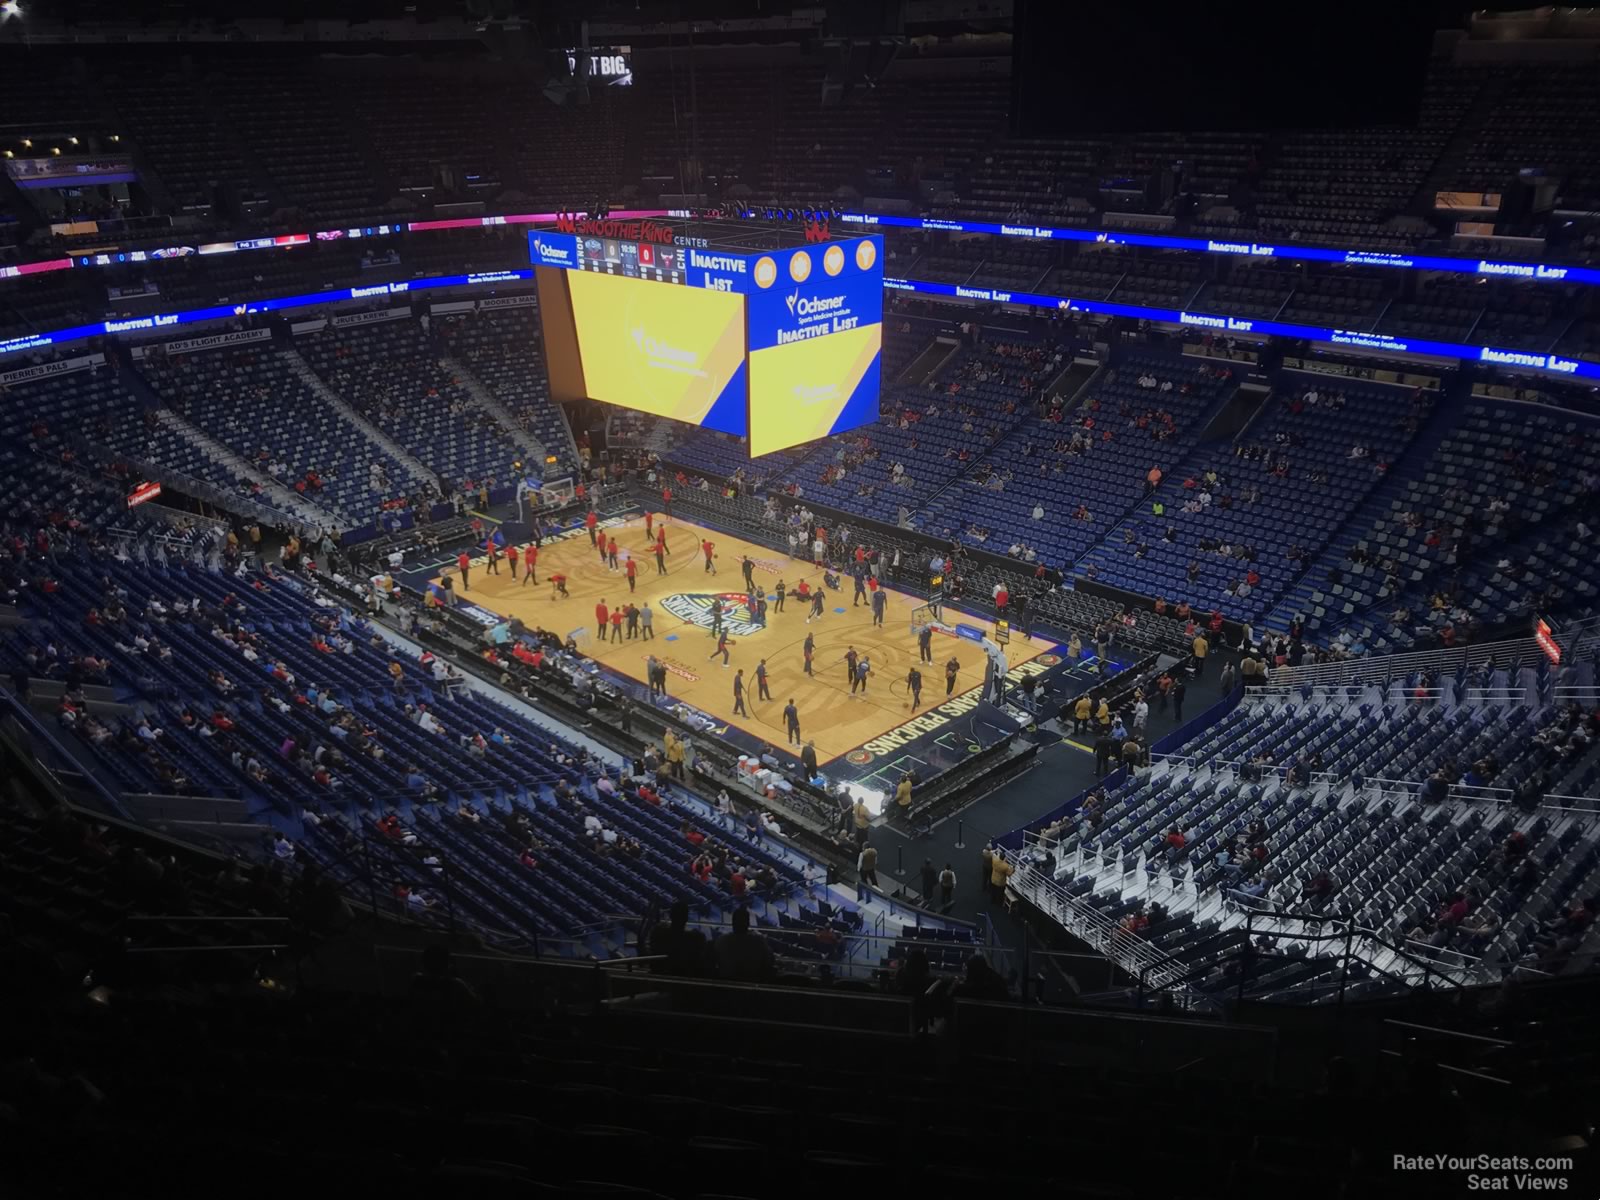 Section 312 at Smoothie King Center